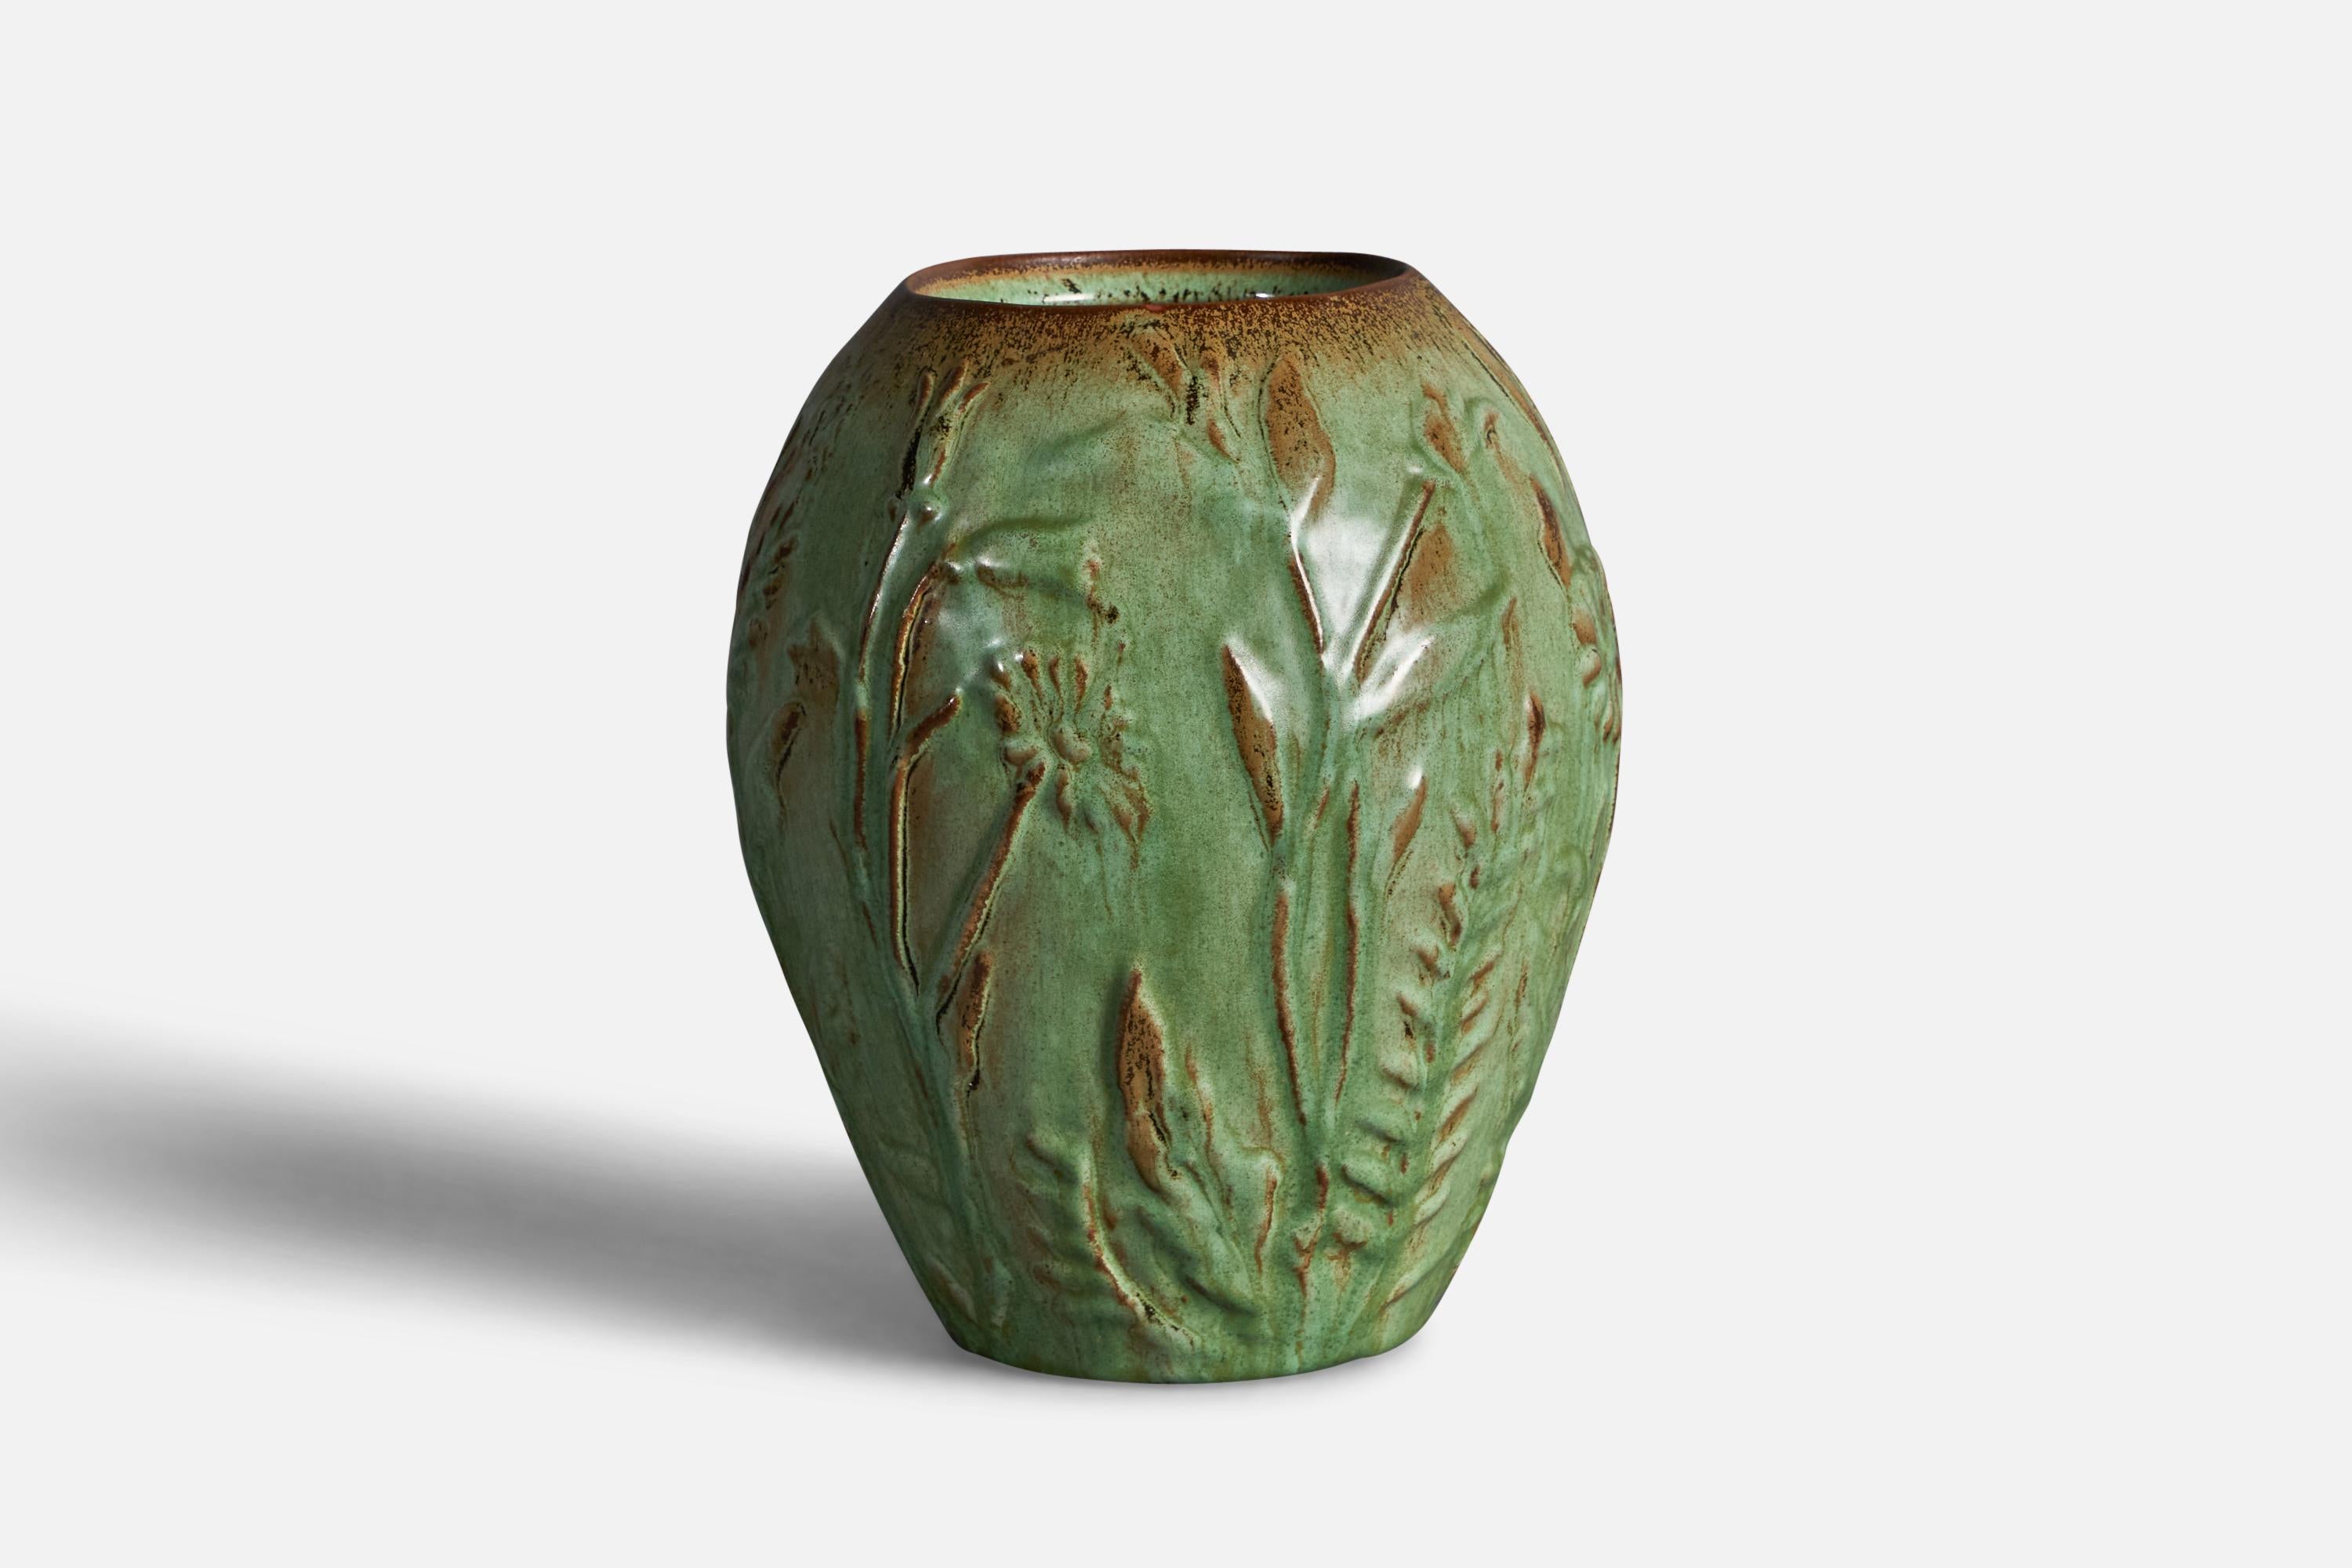 A green and brown glazed earthenware vase designed by Erik Mornils and produced by Nittsjö, Sweden, c. 1930s.